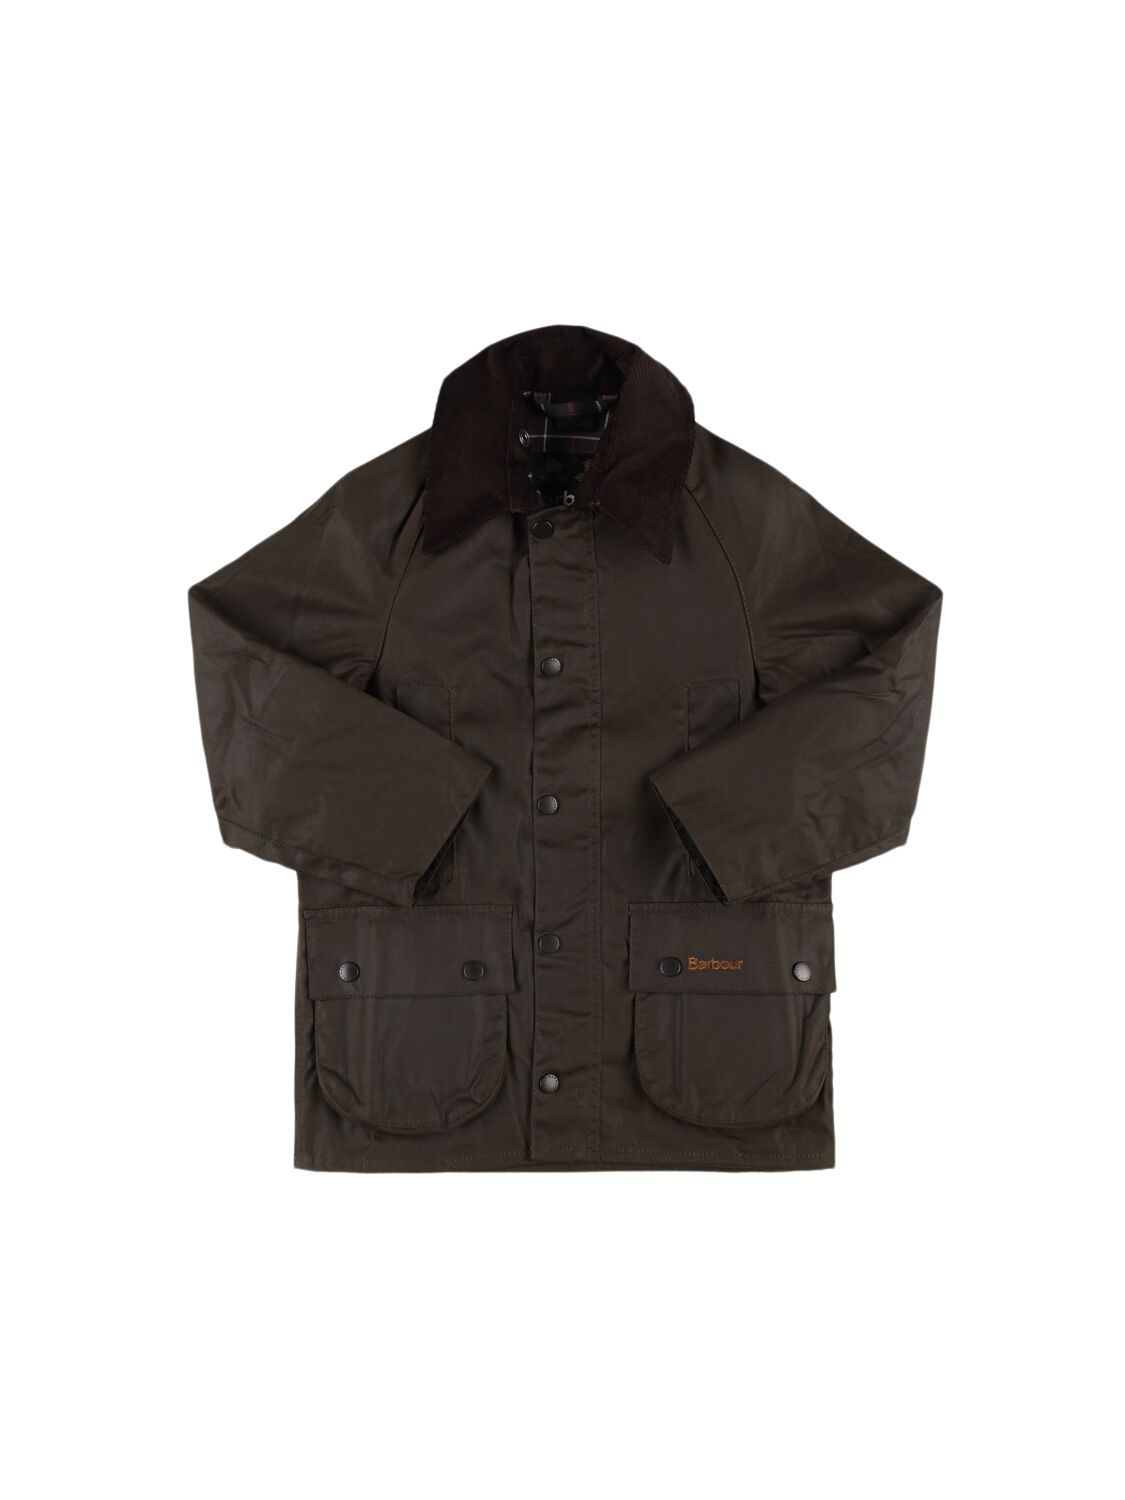 Image of Beaufort Waxed Cotton Jacket